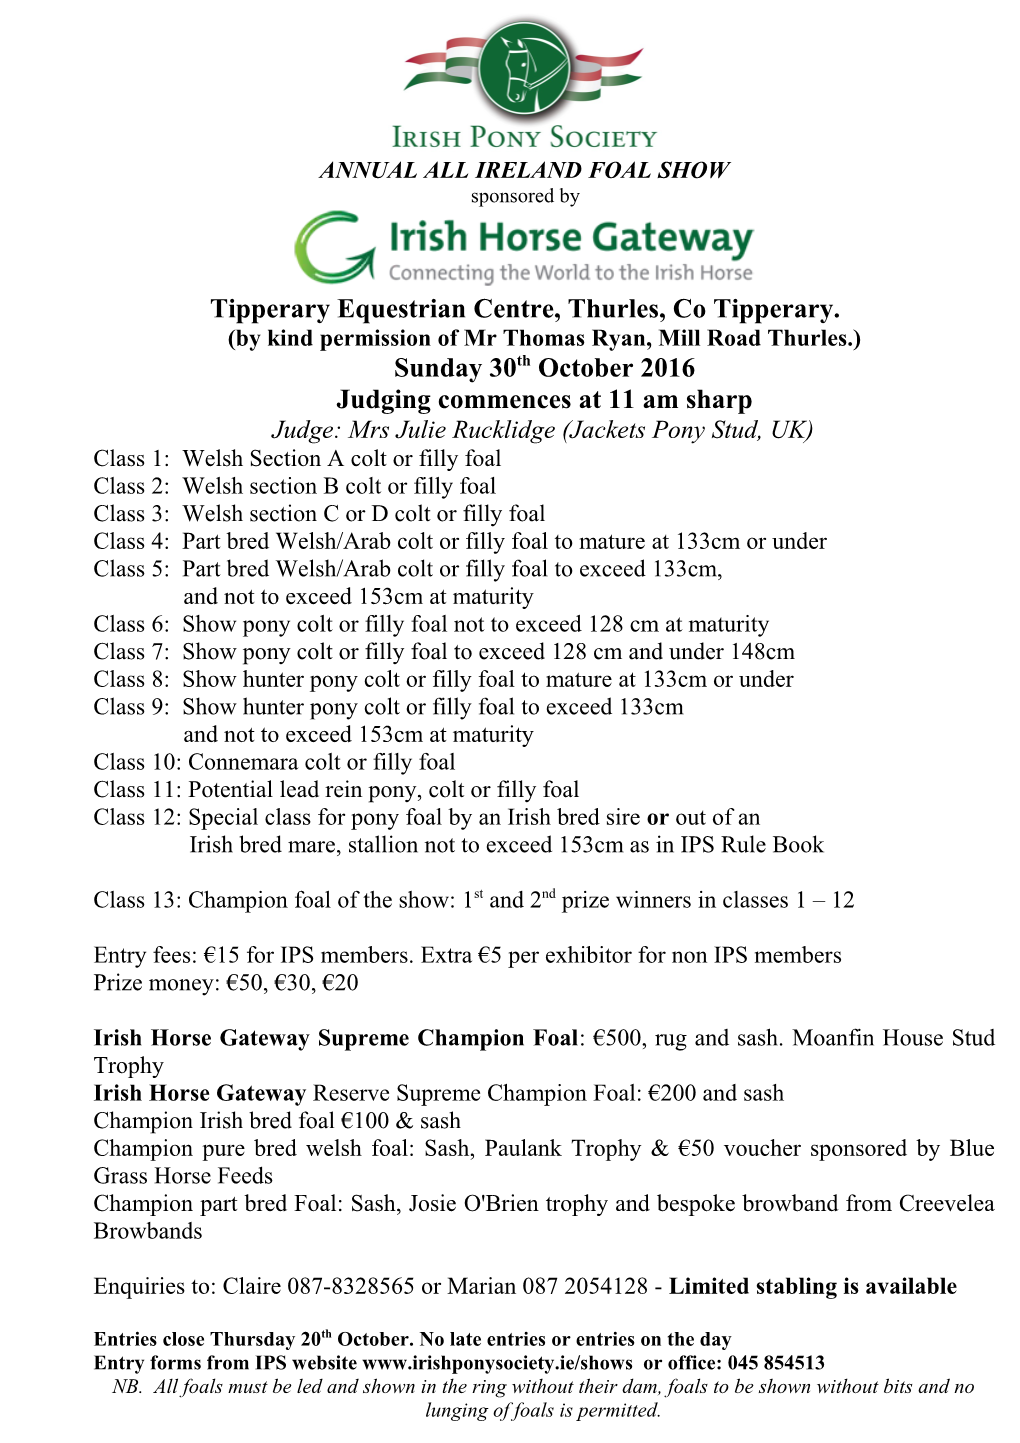 Annual All Ireland Foal Show